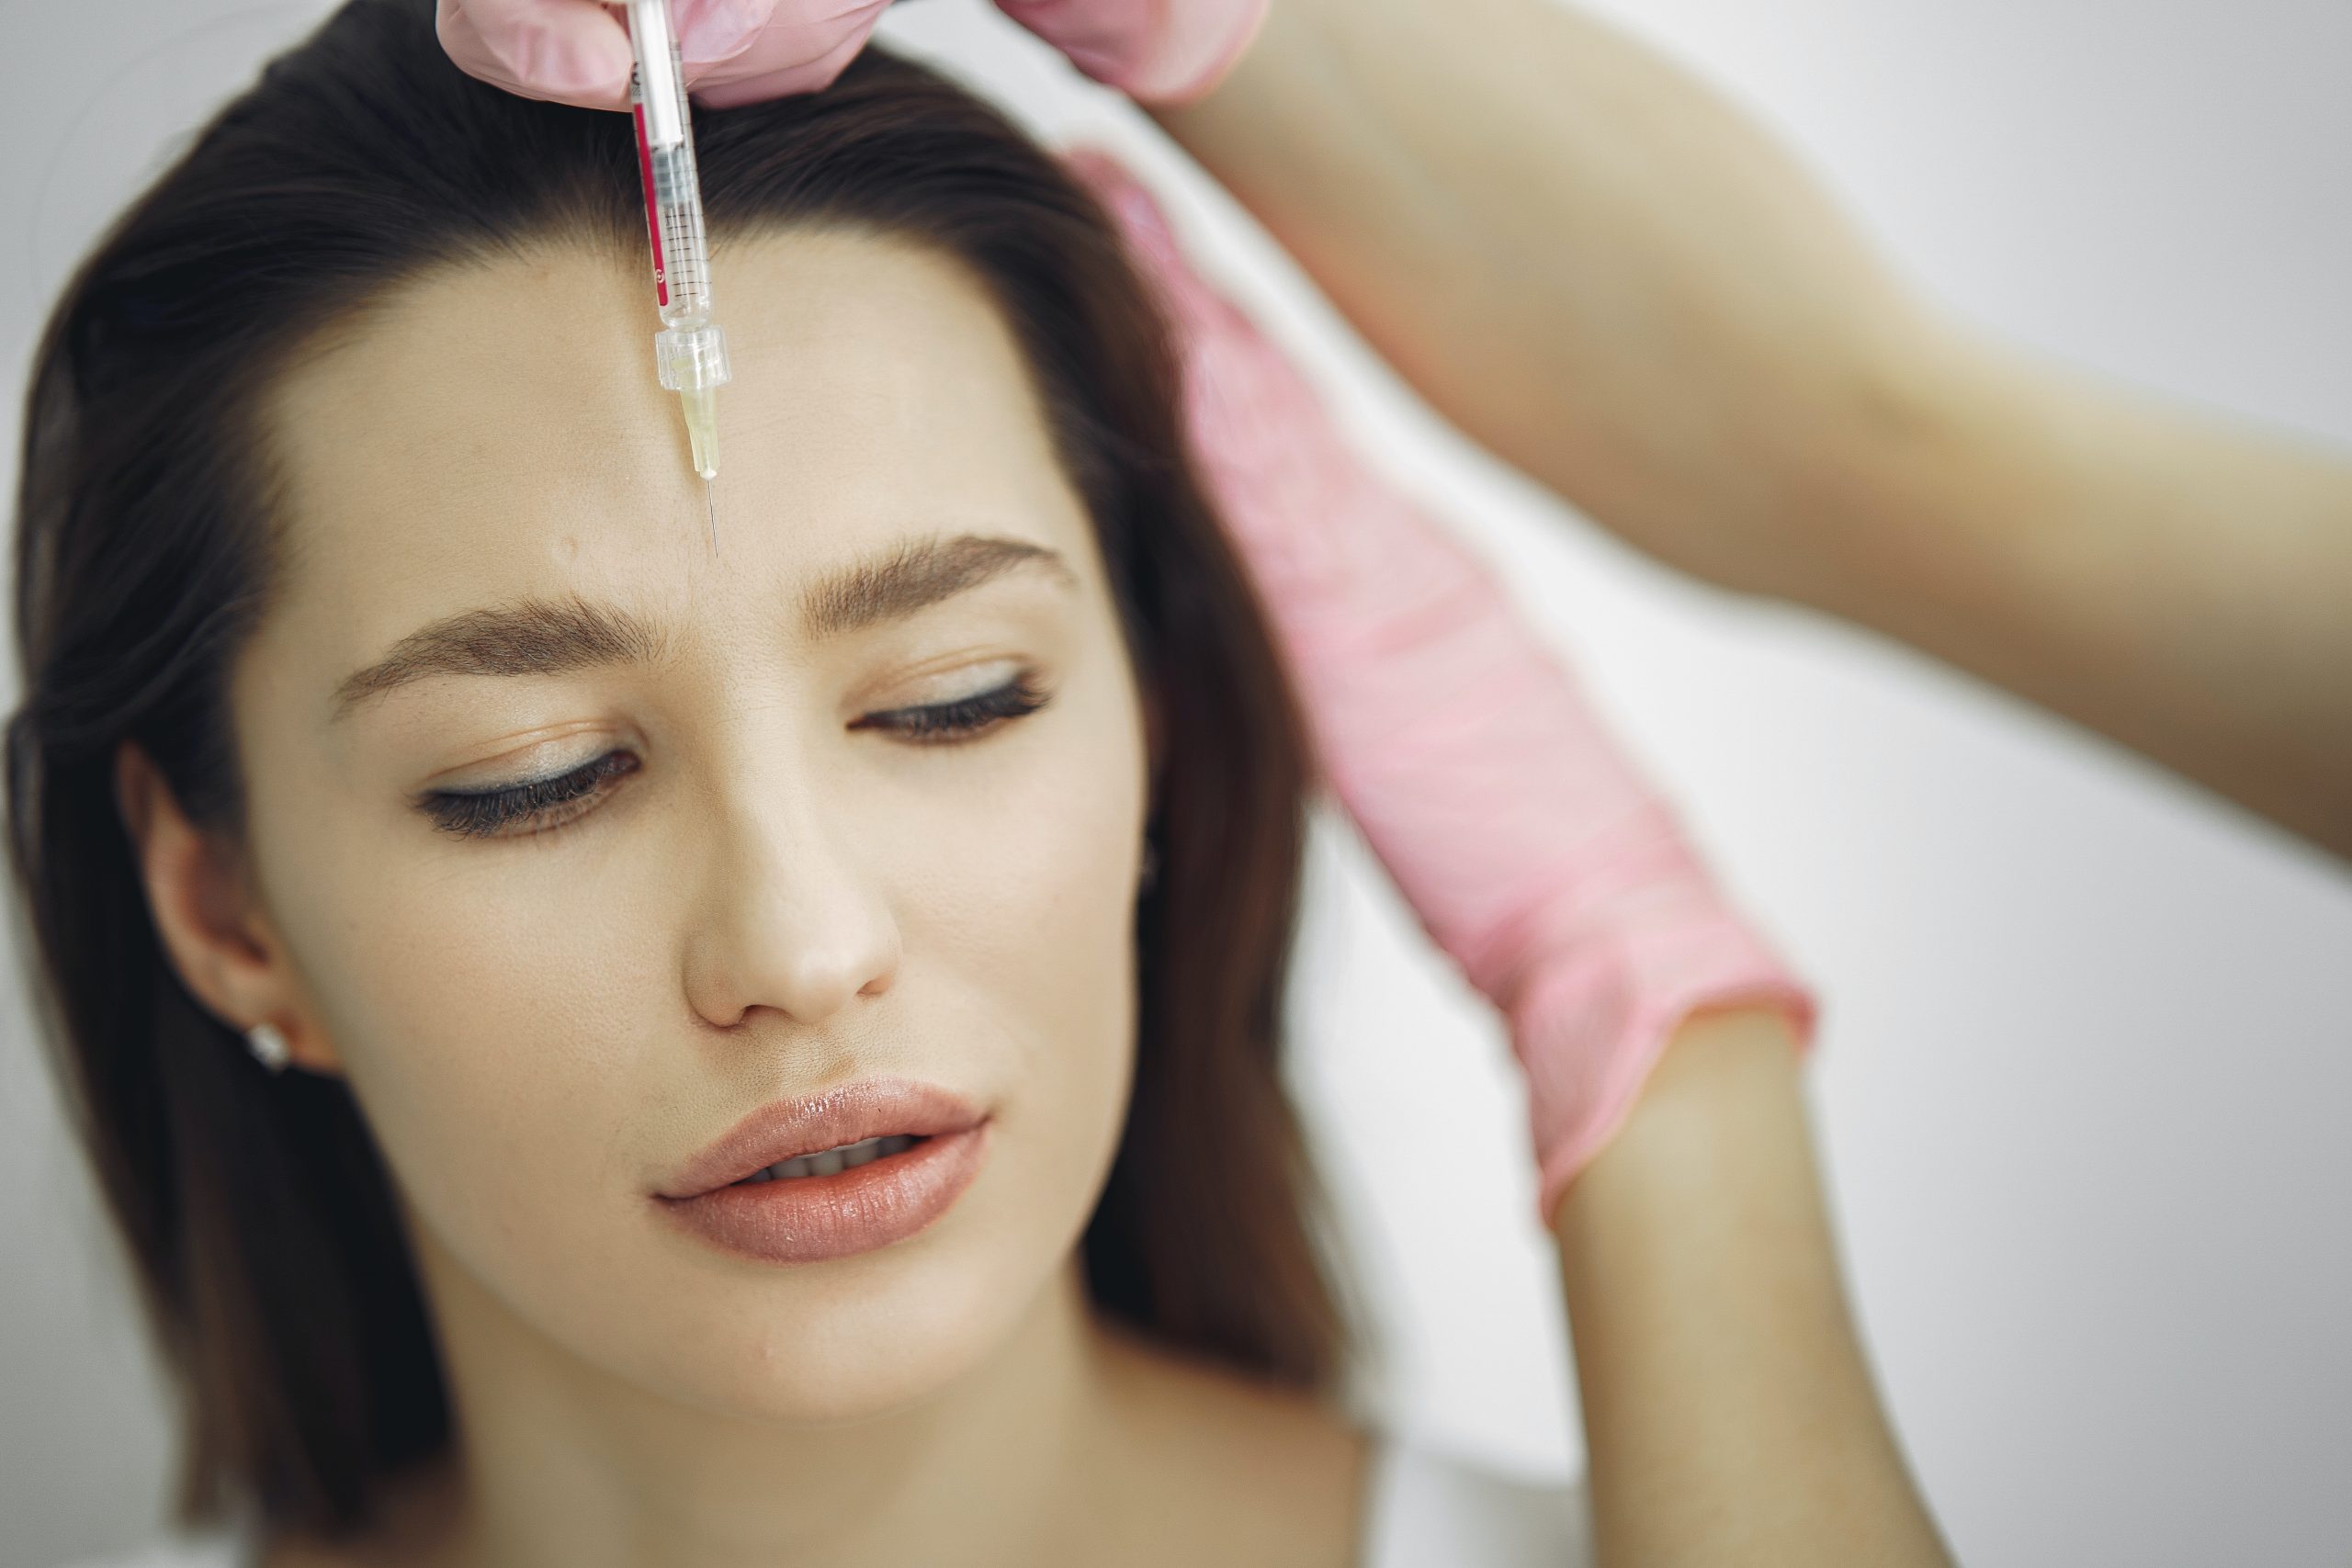 Non-invasive Procedures You Should Consider Getting